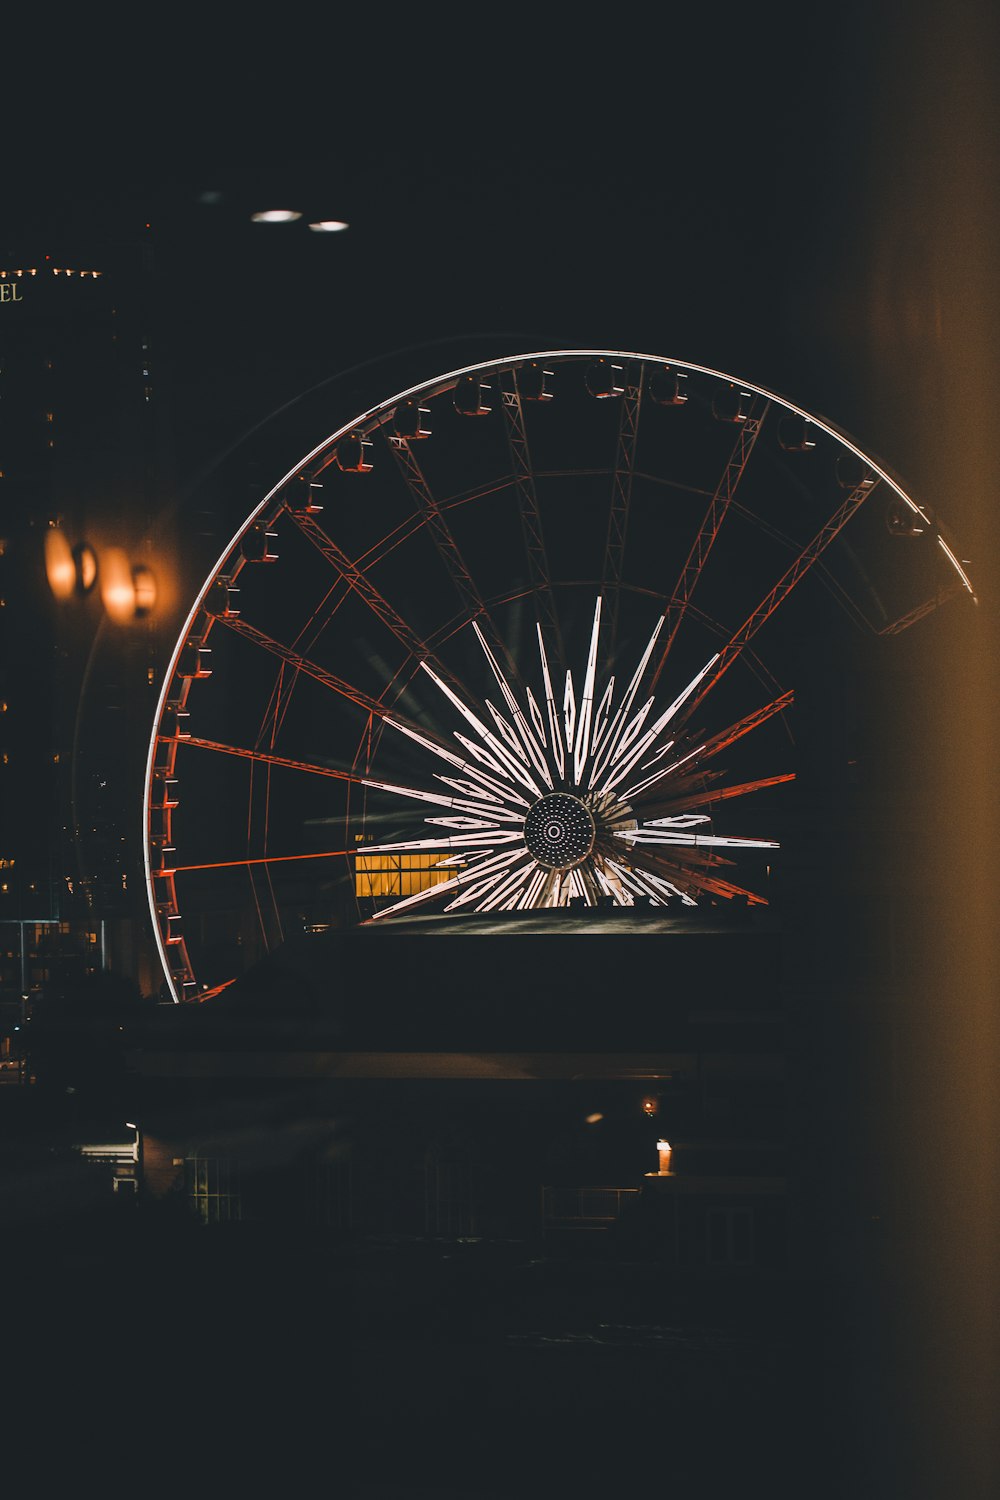 gray and black lighted Ferris wheel during nighttime